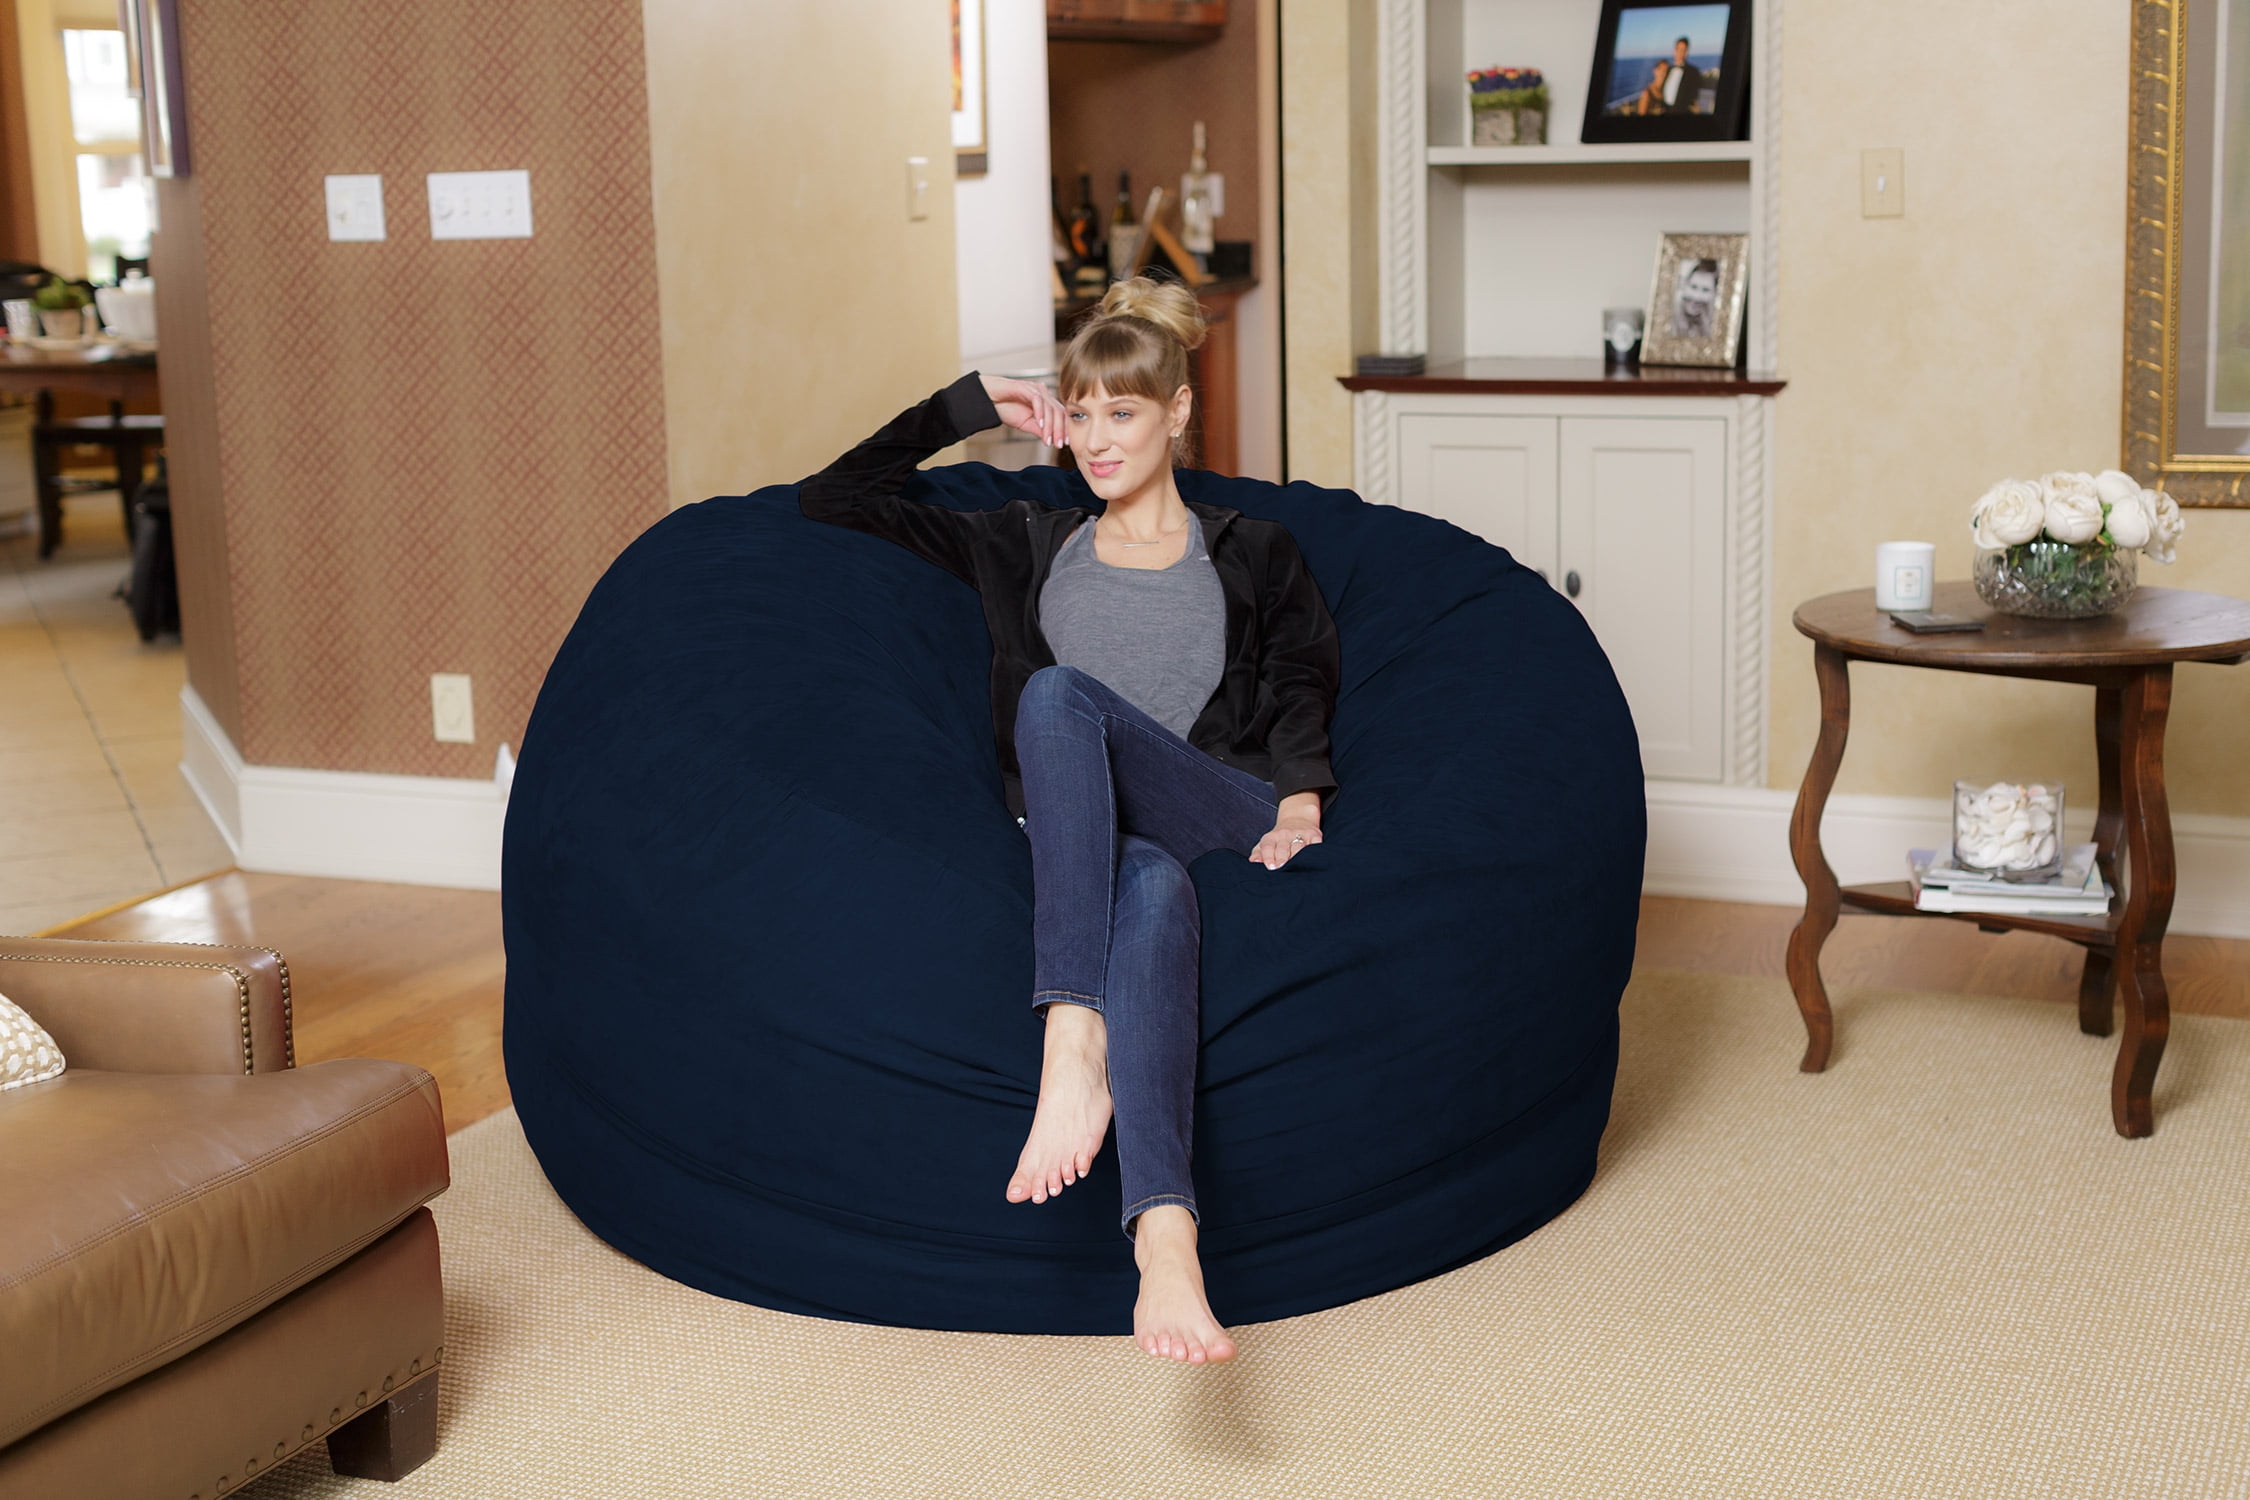 Giant Bean Bag Chair for Kids Adults, 6ft 7ft Bean Bag Chair, Washable Jumbo Bean Bag Sofa Sack Chair Large Lounger Faux Fur Cover for Dorm Family